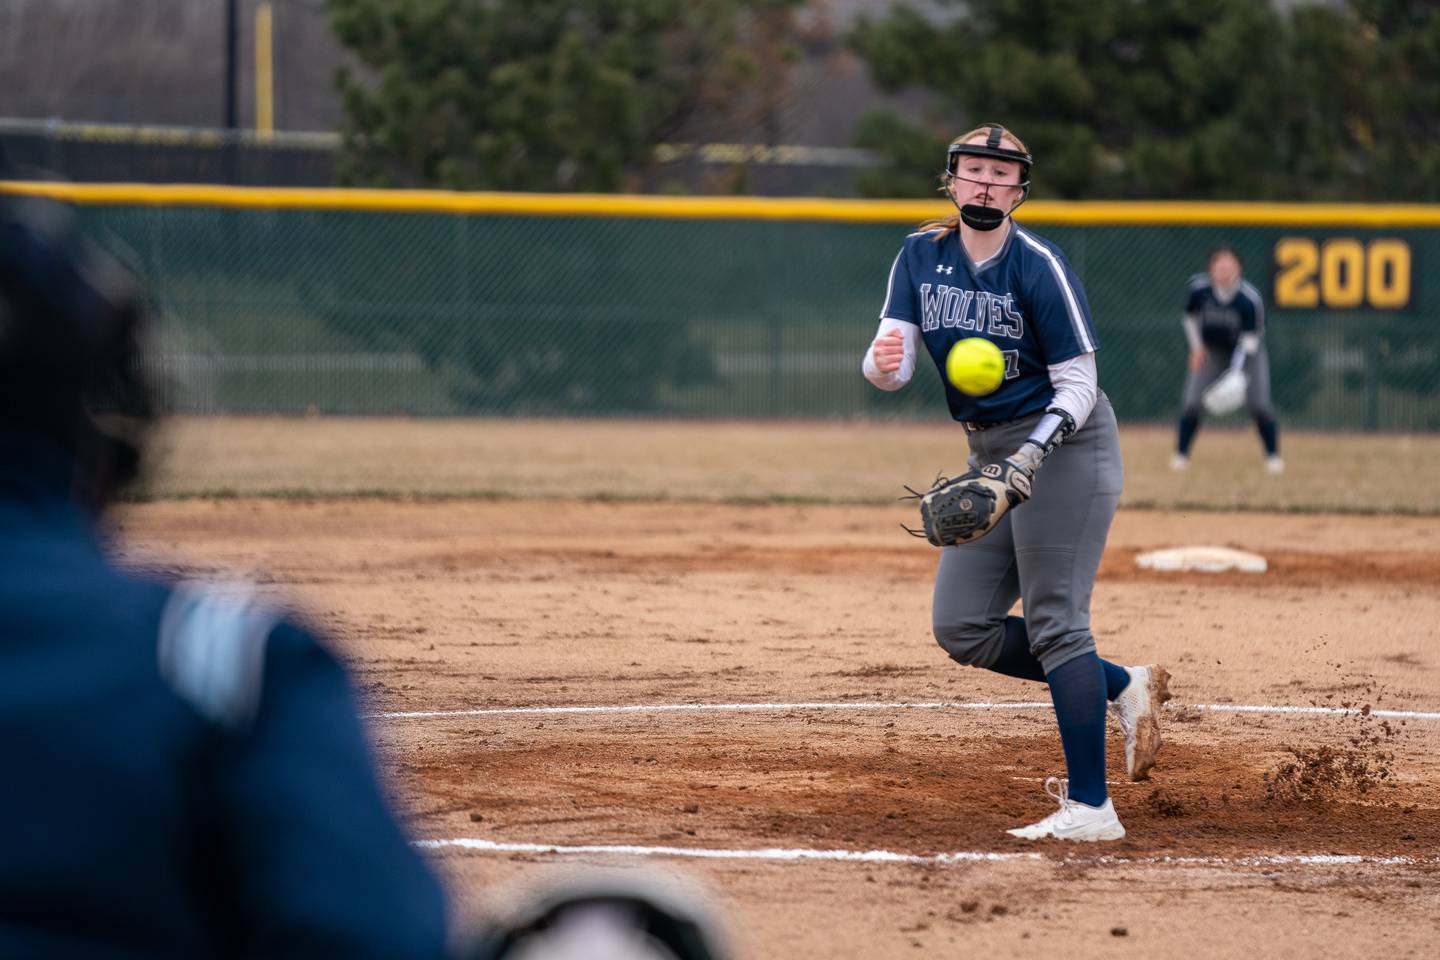 Oswego East's Emma LenczewskI (7) delivers a pitch against Metea Valley during a softball game at Metea Valley High School in Aurora on Friday, Mar 24, 2023.